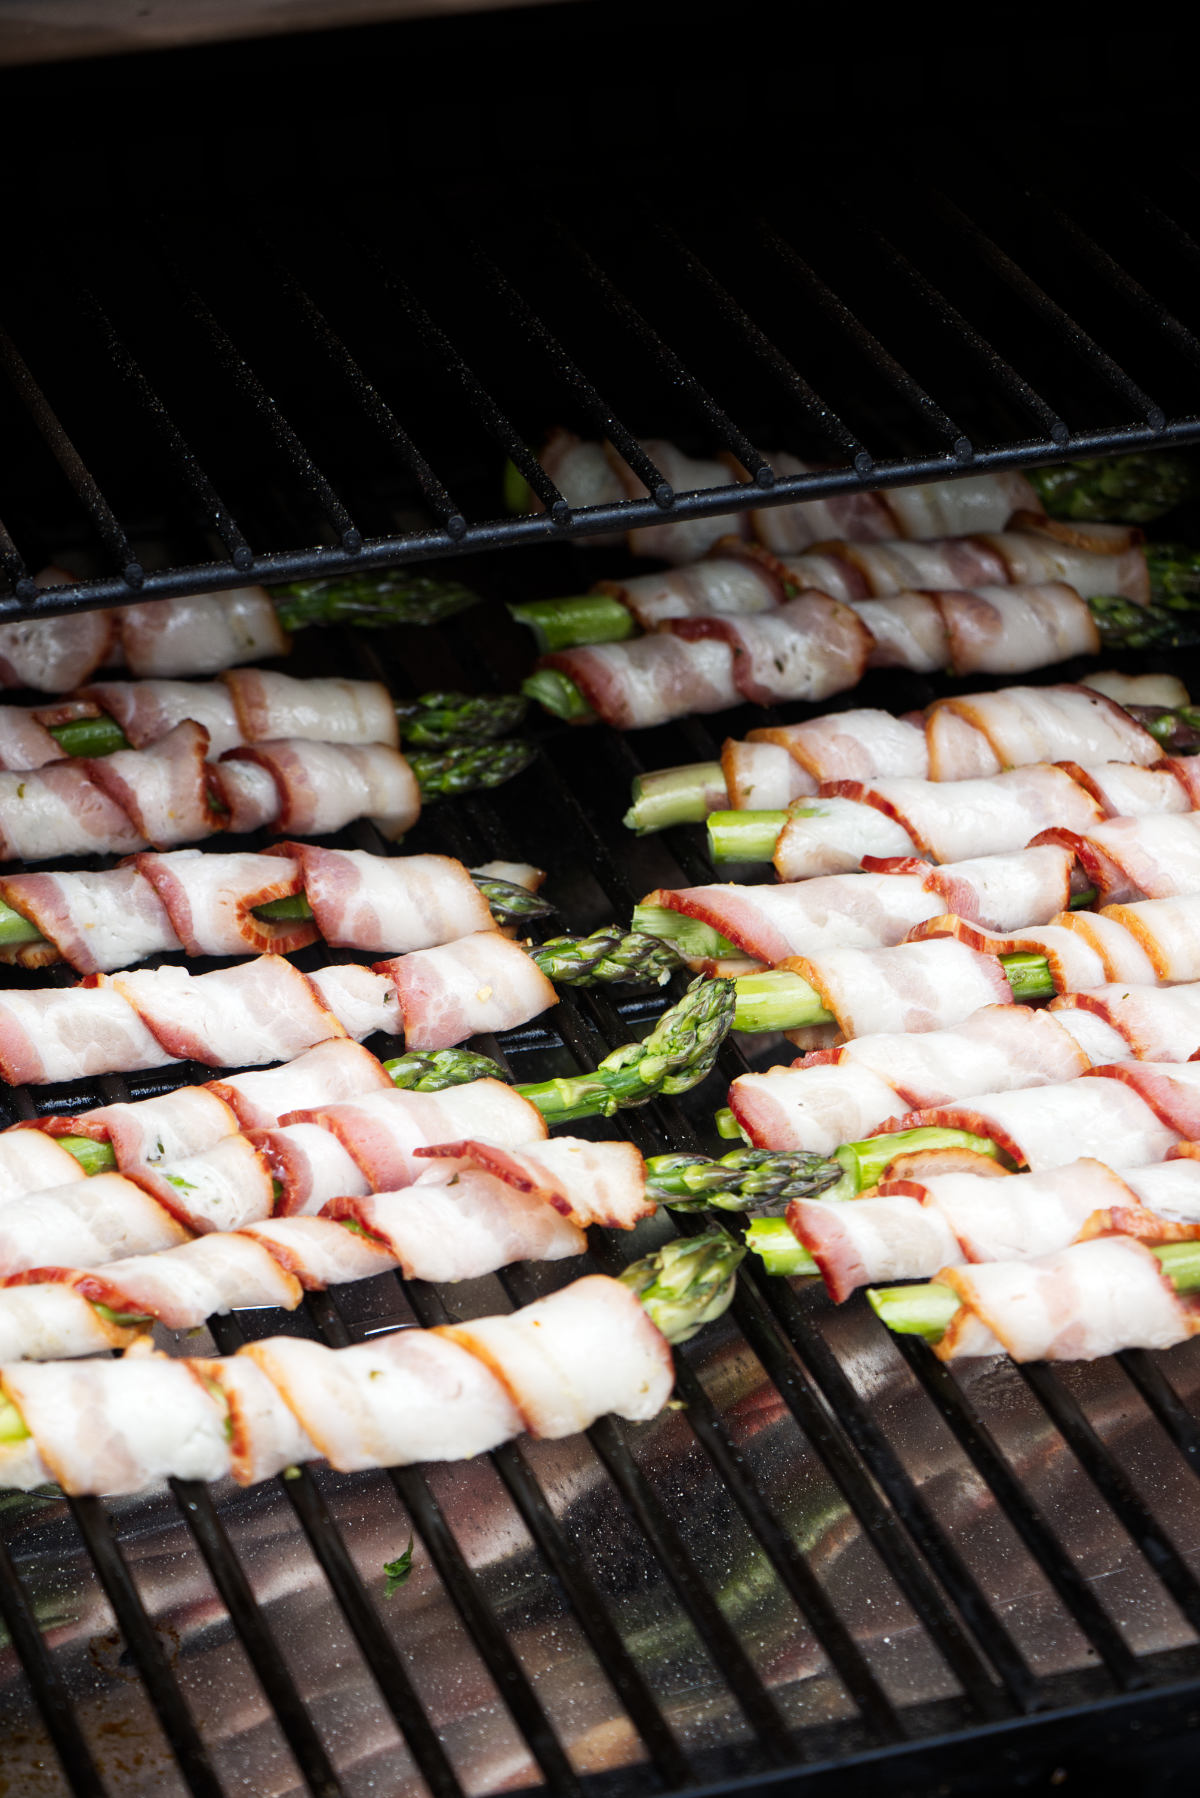 Bacon wrapped asparagus on the grill.